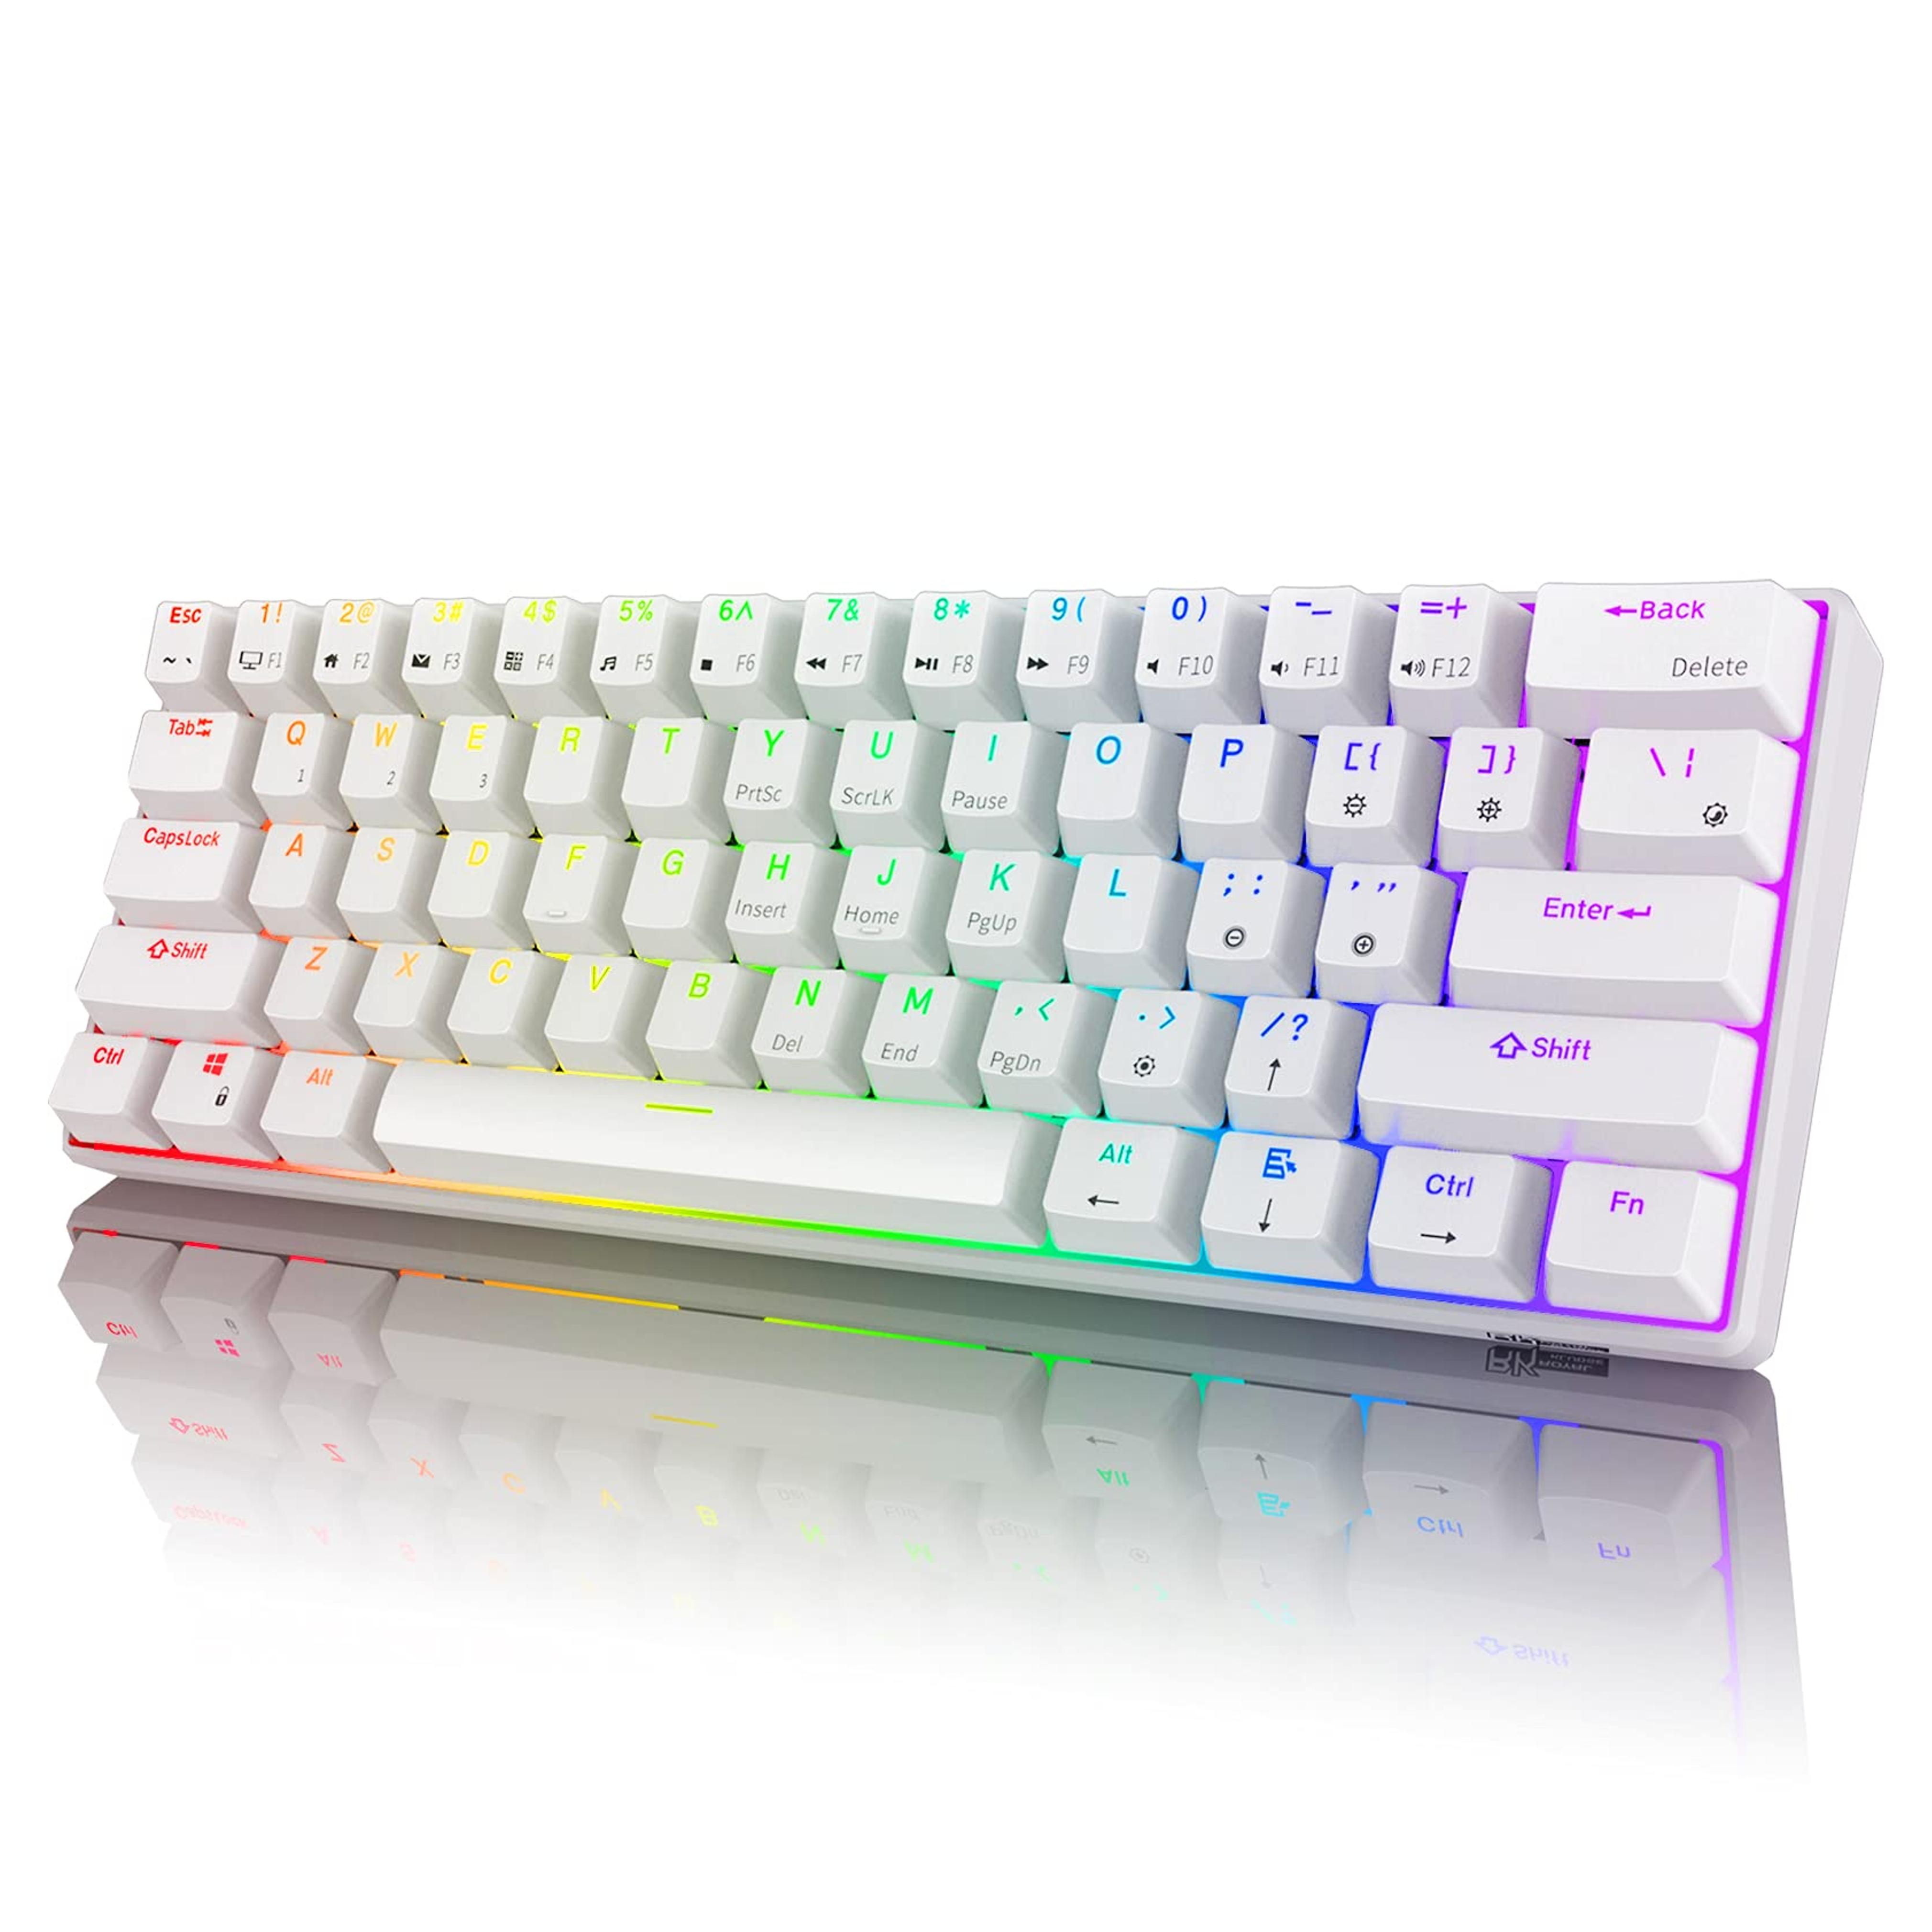 RK ROYAL KLUDGE RK61 2.4Ghz Wireless/Bluetooth/Wired 60% Mechanical Keyboard, 61 Keys RGB Hot Swappable Red Switch Gaming Keyboard with Software for Win/Mac